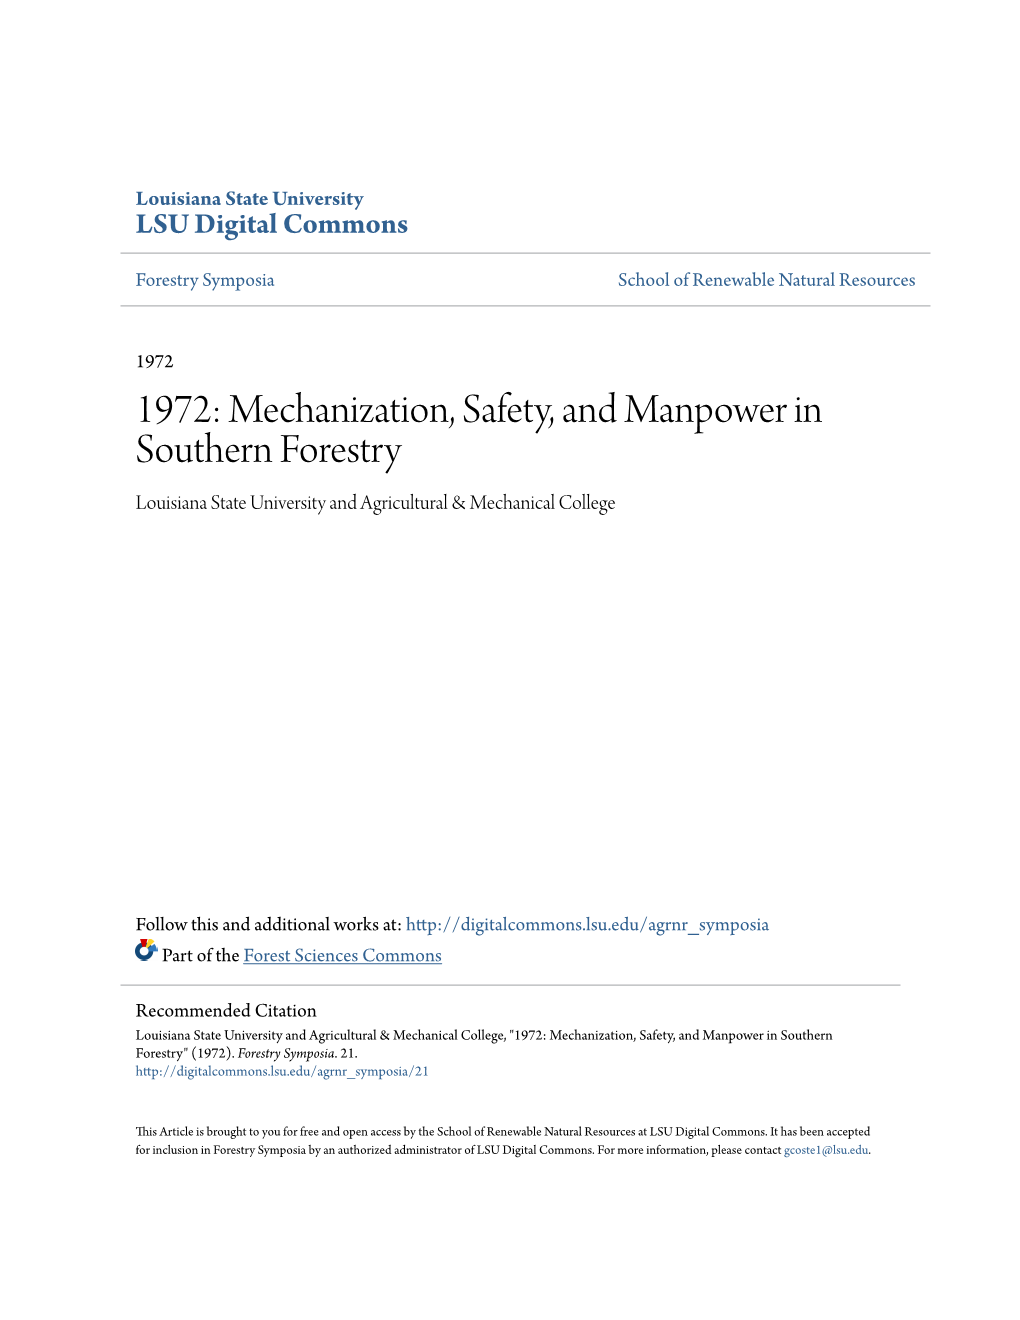 Mechanization, Safety, and Manpower in Southern Forestry Louisiana State University and Agricultural & Mechanical College